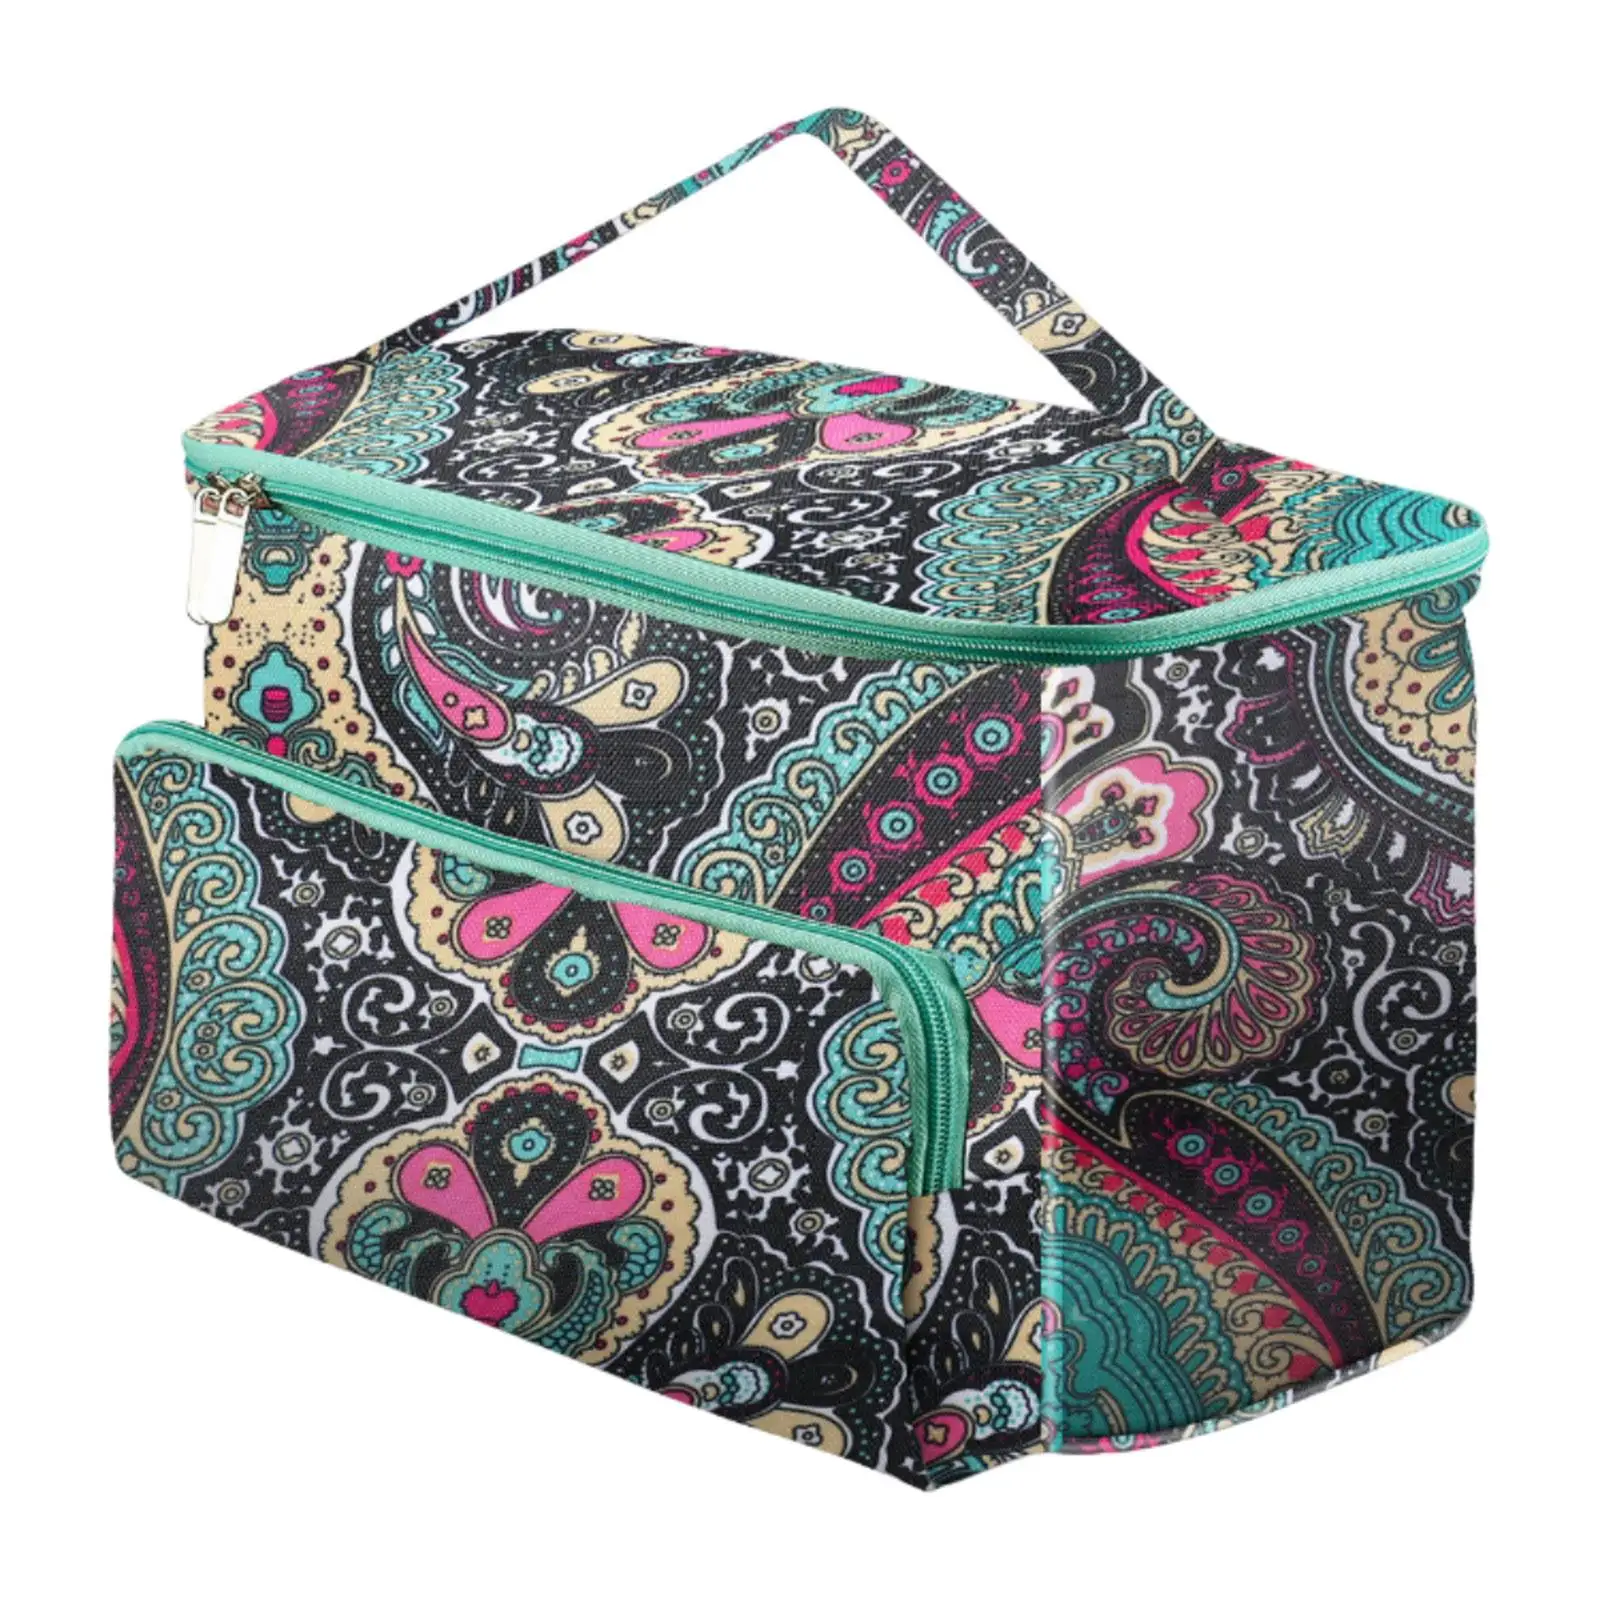 Yarn Storage Tote Bag 600D Oxford Cloth Portable for Traveling Crochet Bag